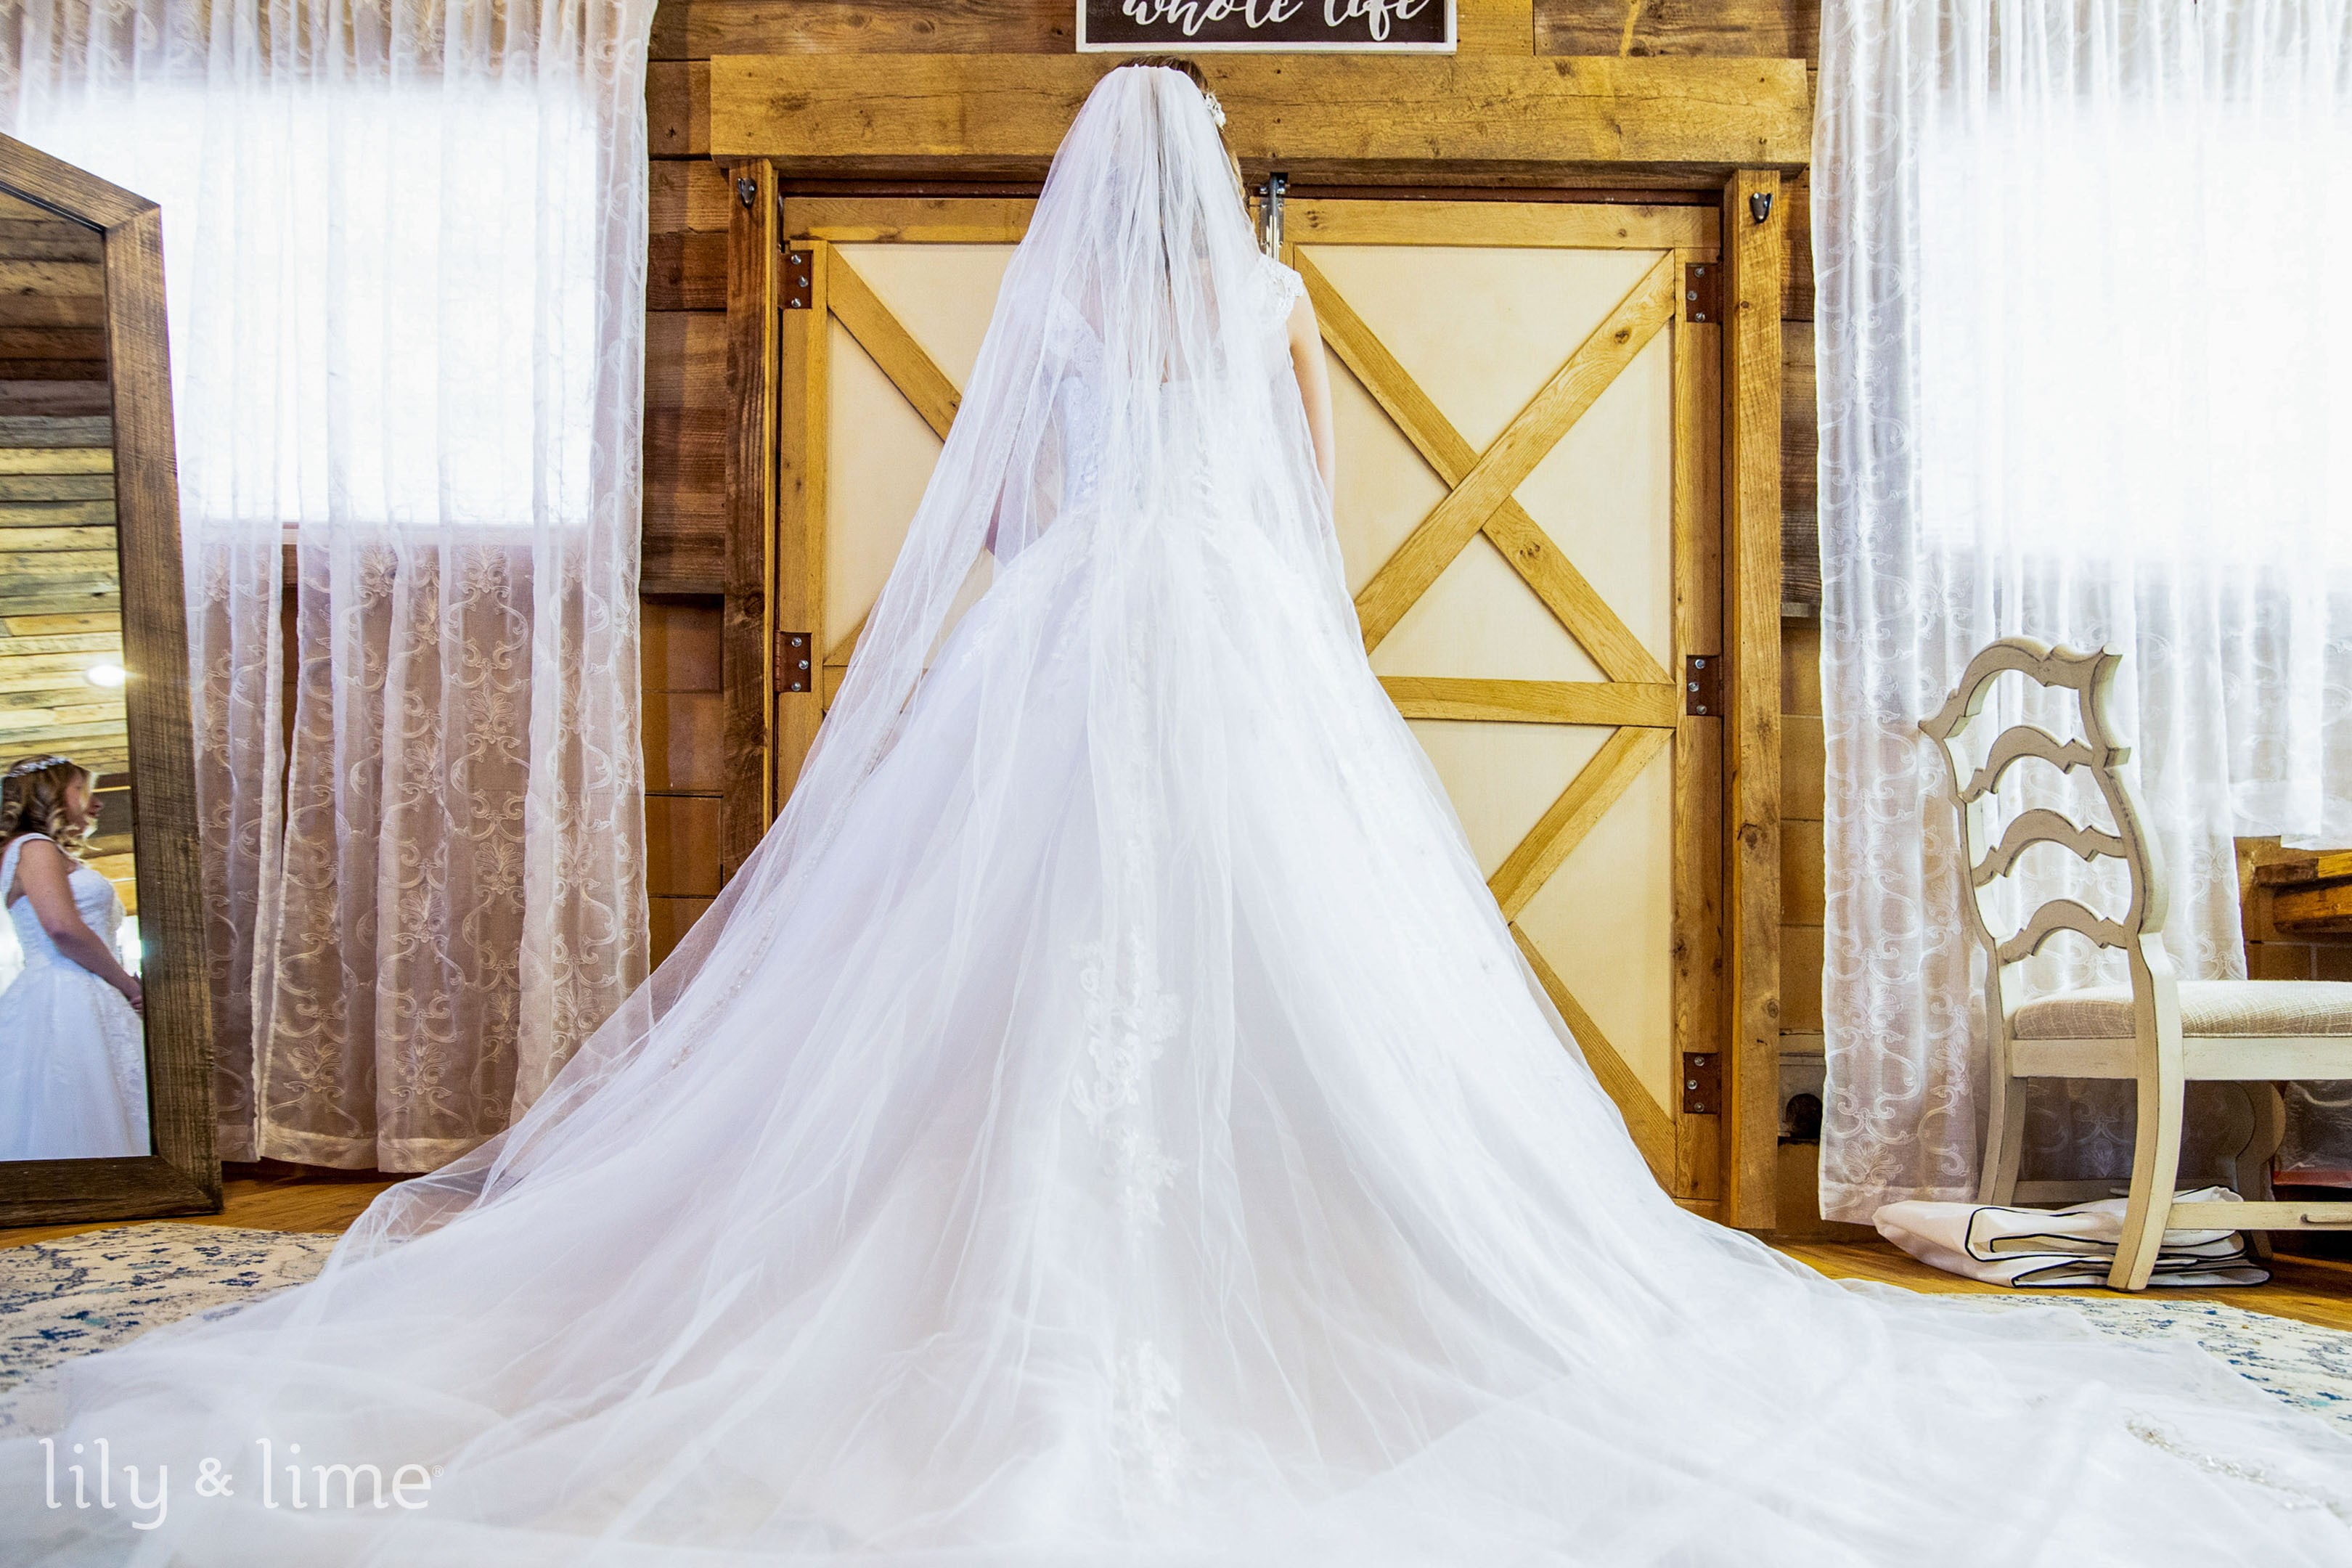 Wedding veils with real wow factor… - BLOG